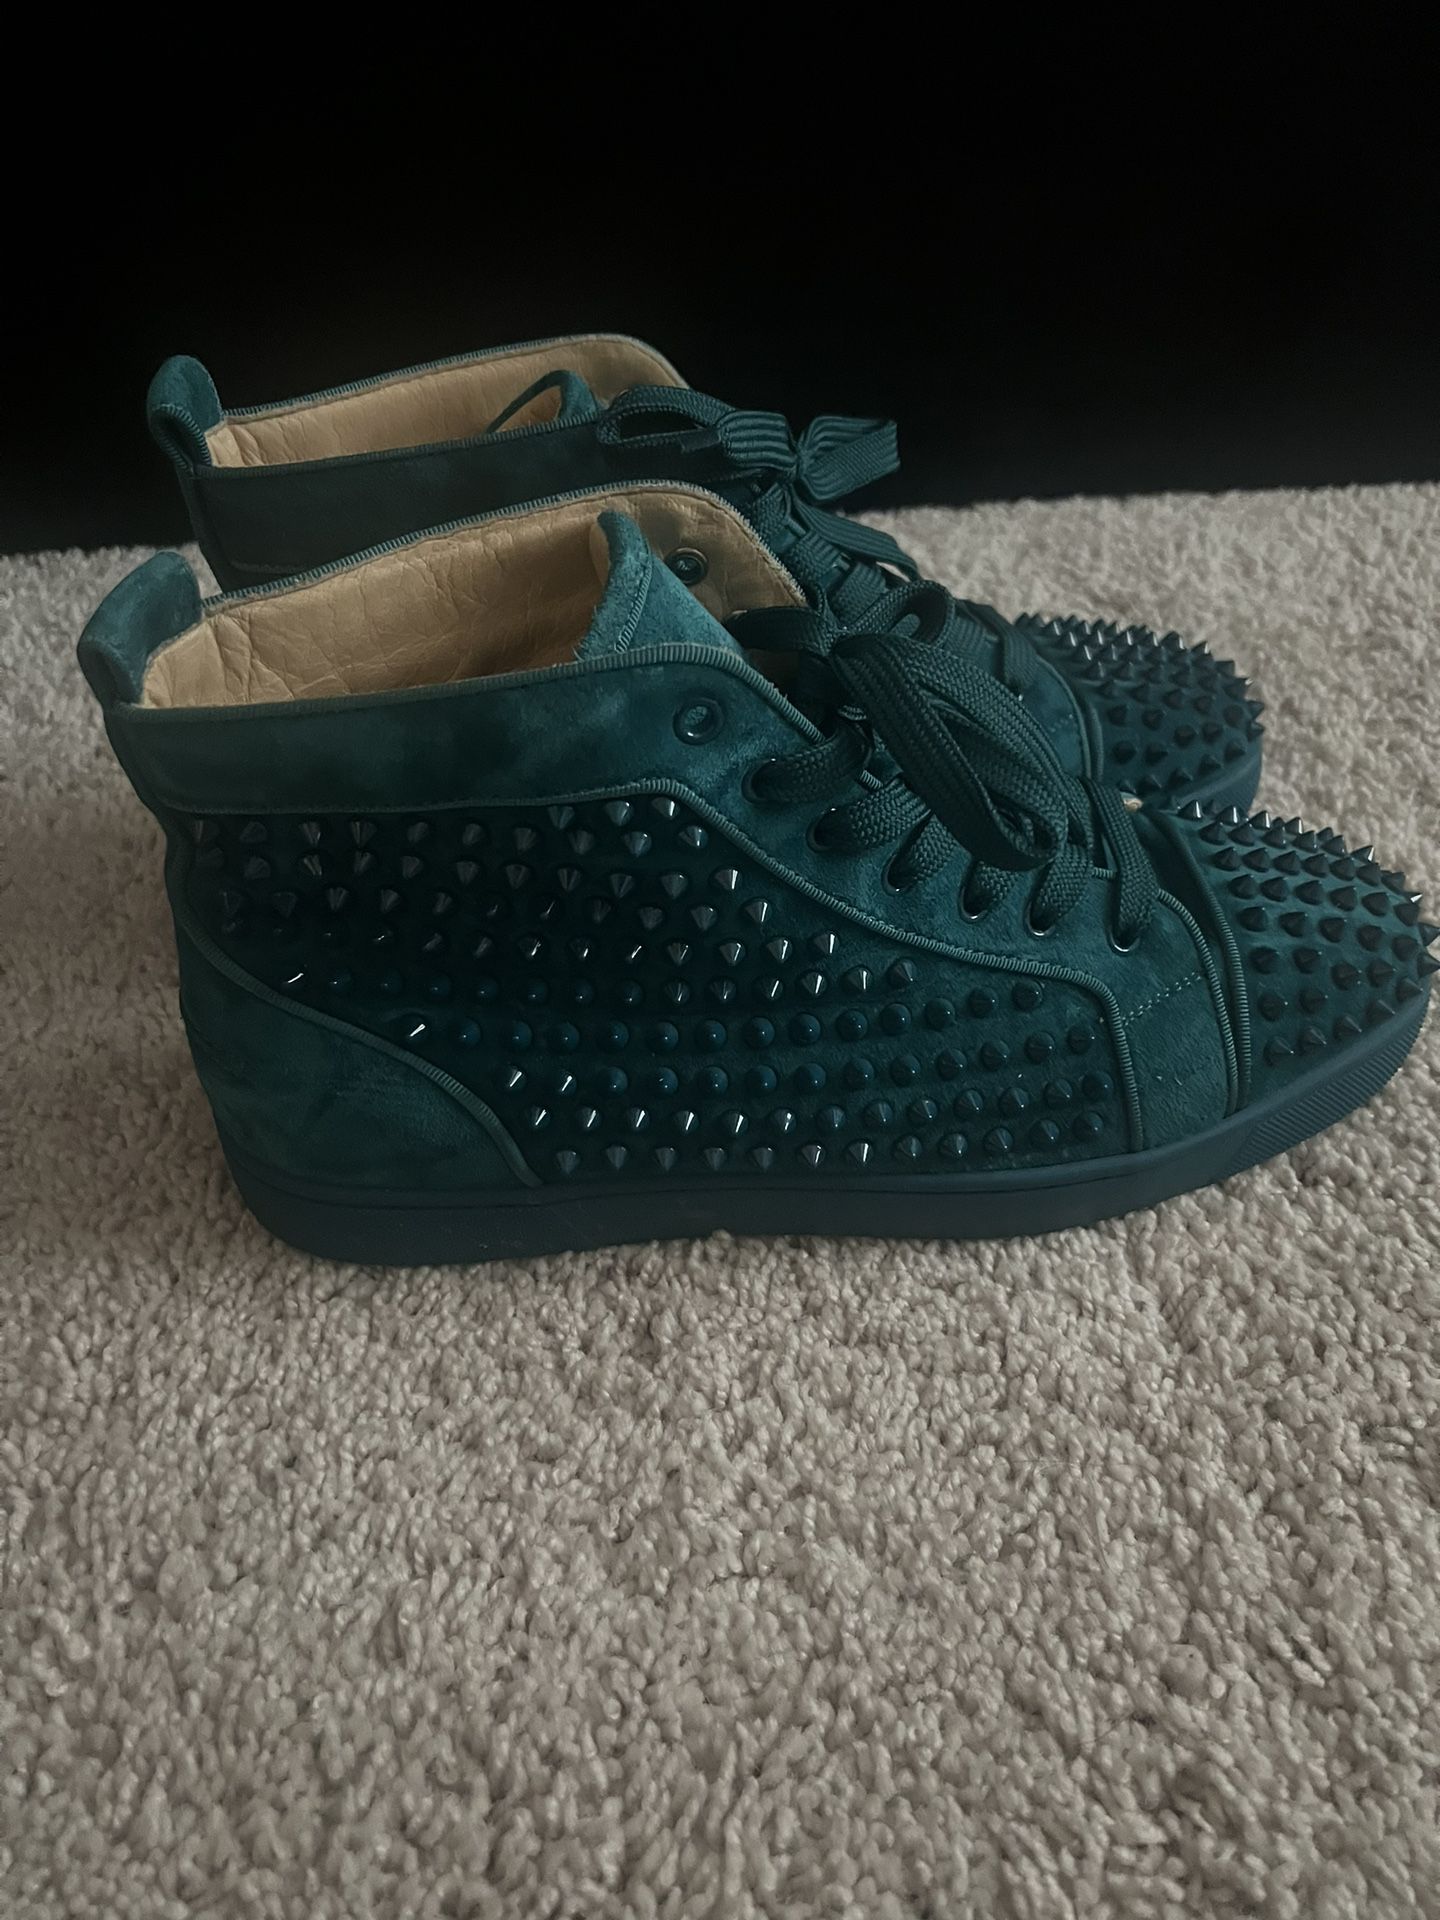 Authentic Christian Louboutin Shoes Sz 11 (With Internet Receipt) for Sale  in Orlando, FL - OfferUp